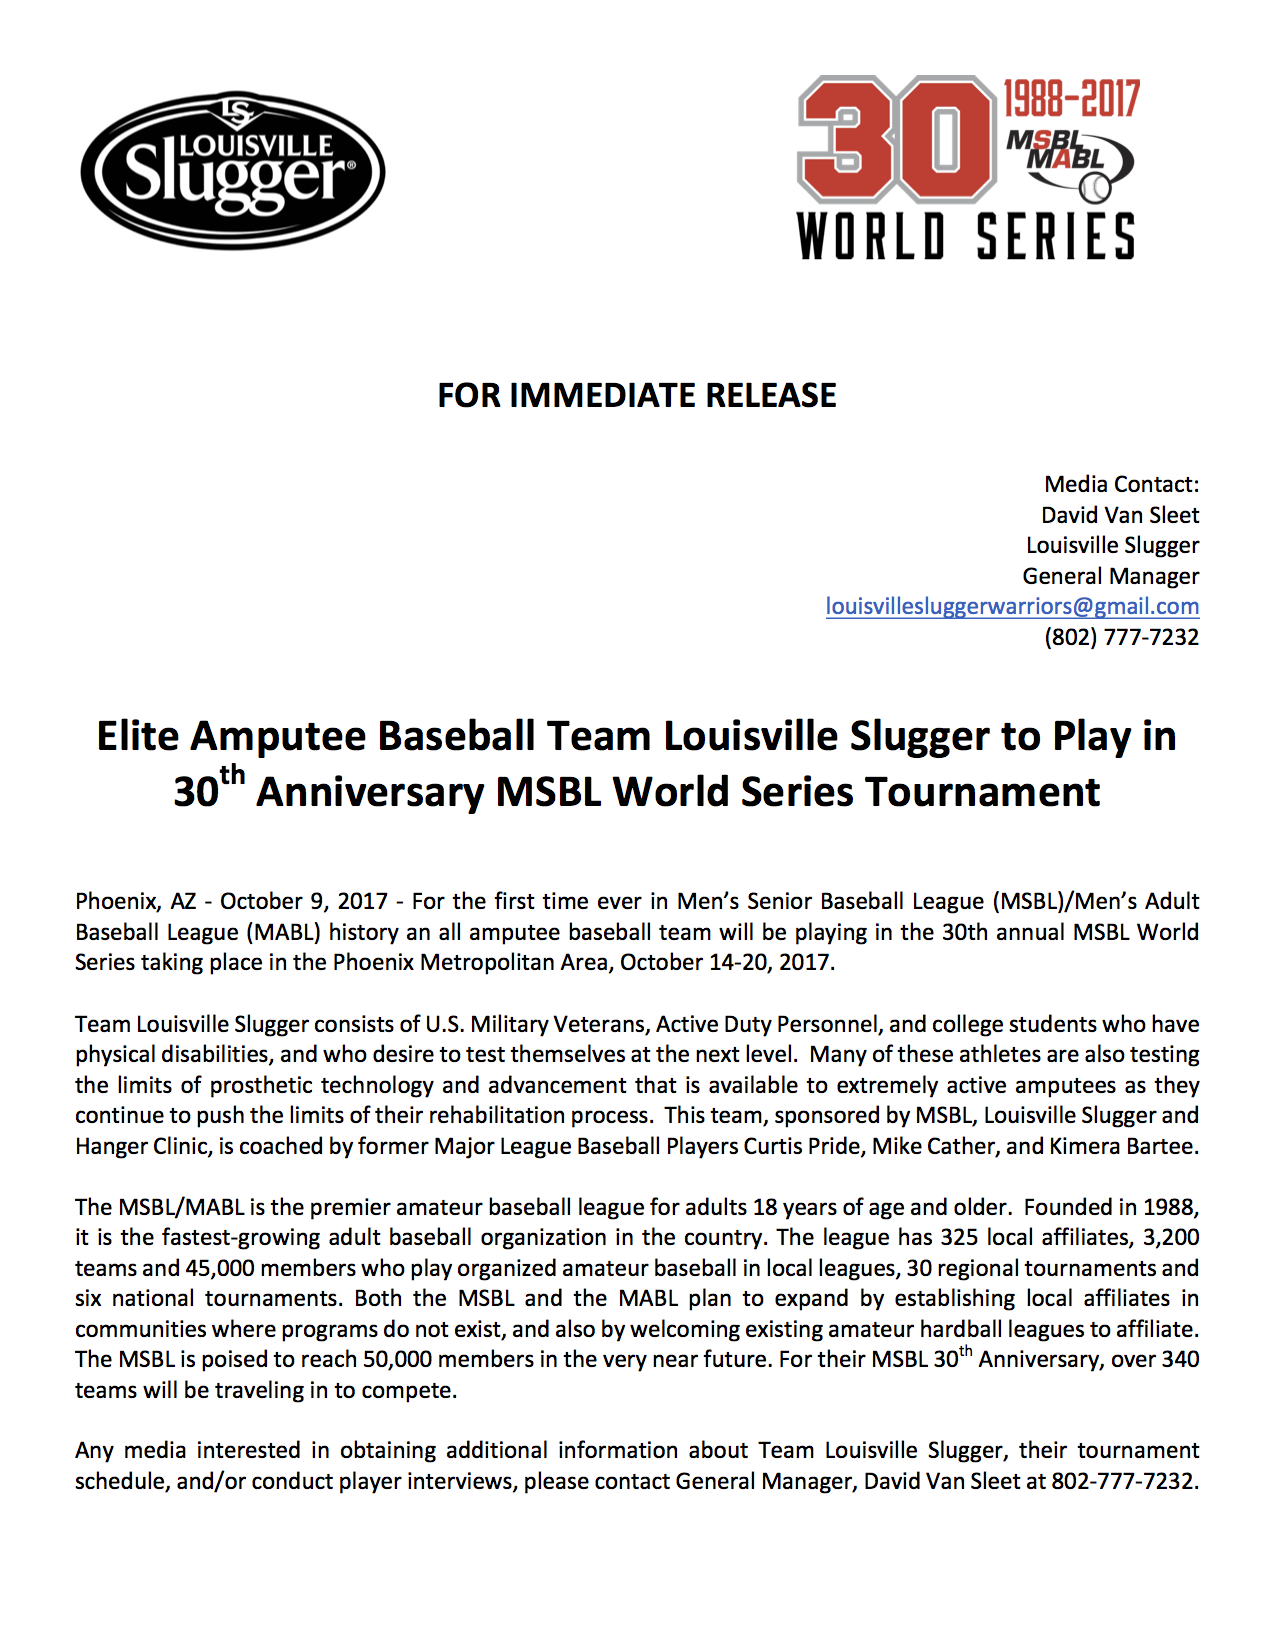 A press release about the 3 0 th anniversary of the world series.